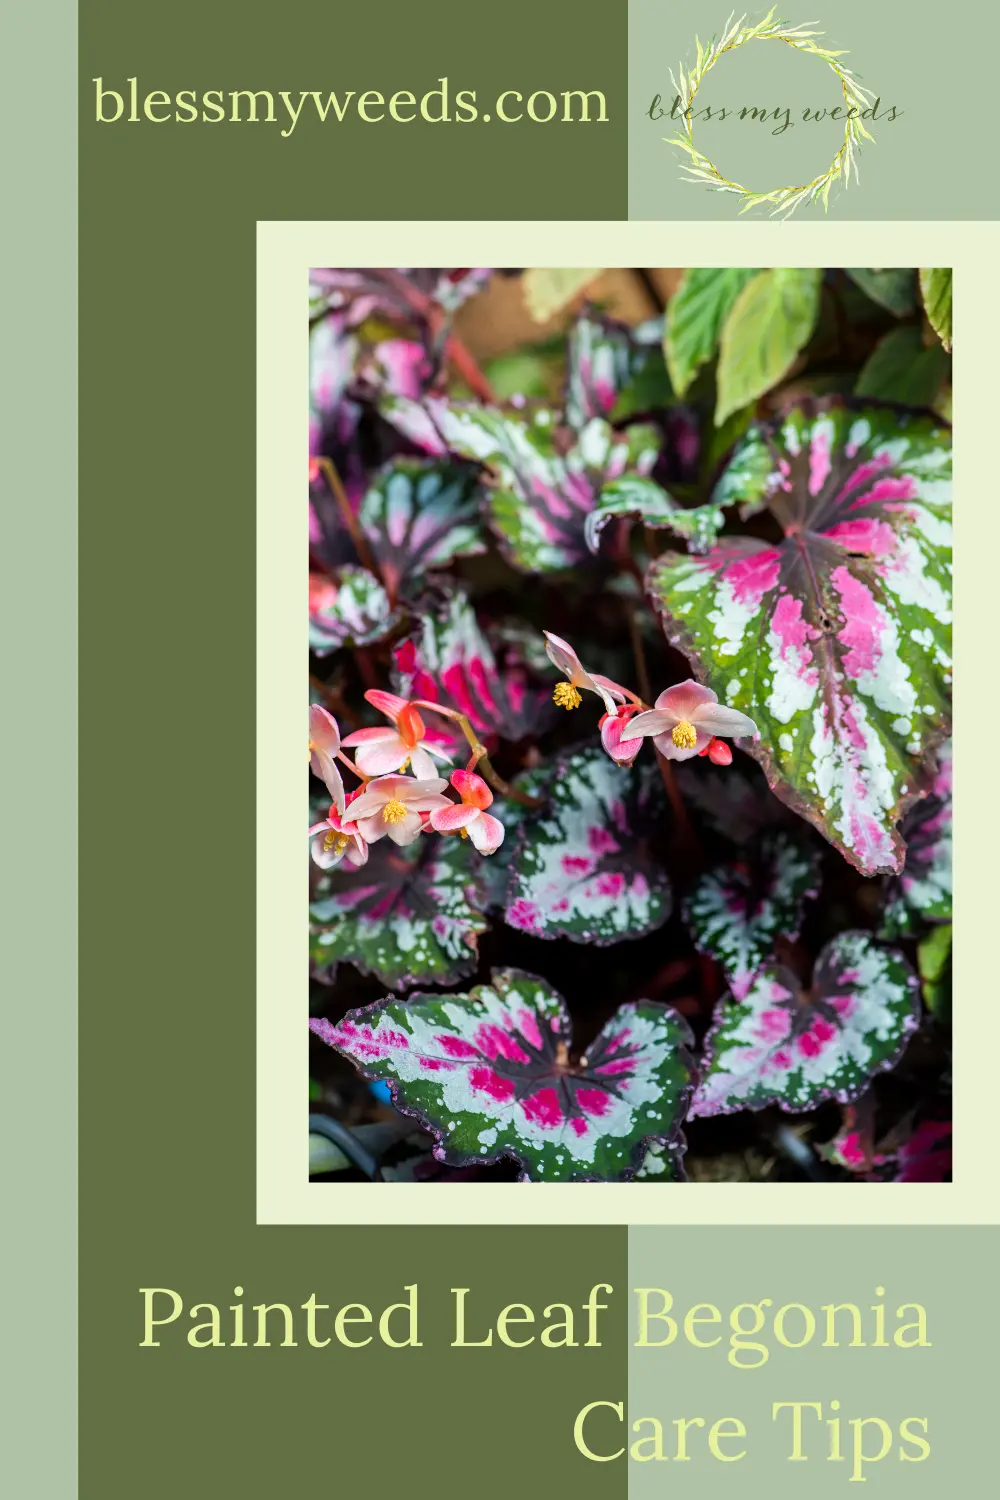 Blessmyweeds.com makes gardening easier than ever with helpful hacks and perfect plant recommendations! Let your hard work fully bloom and master your technique. Find out how you can better care for your painted leaf begonia!